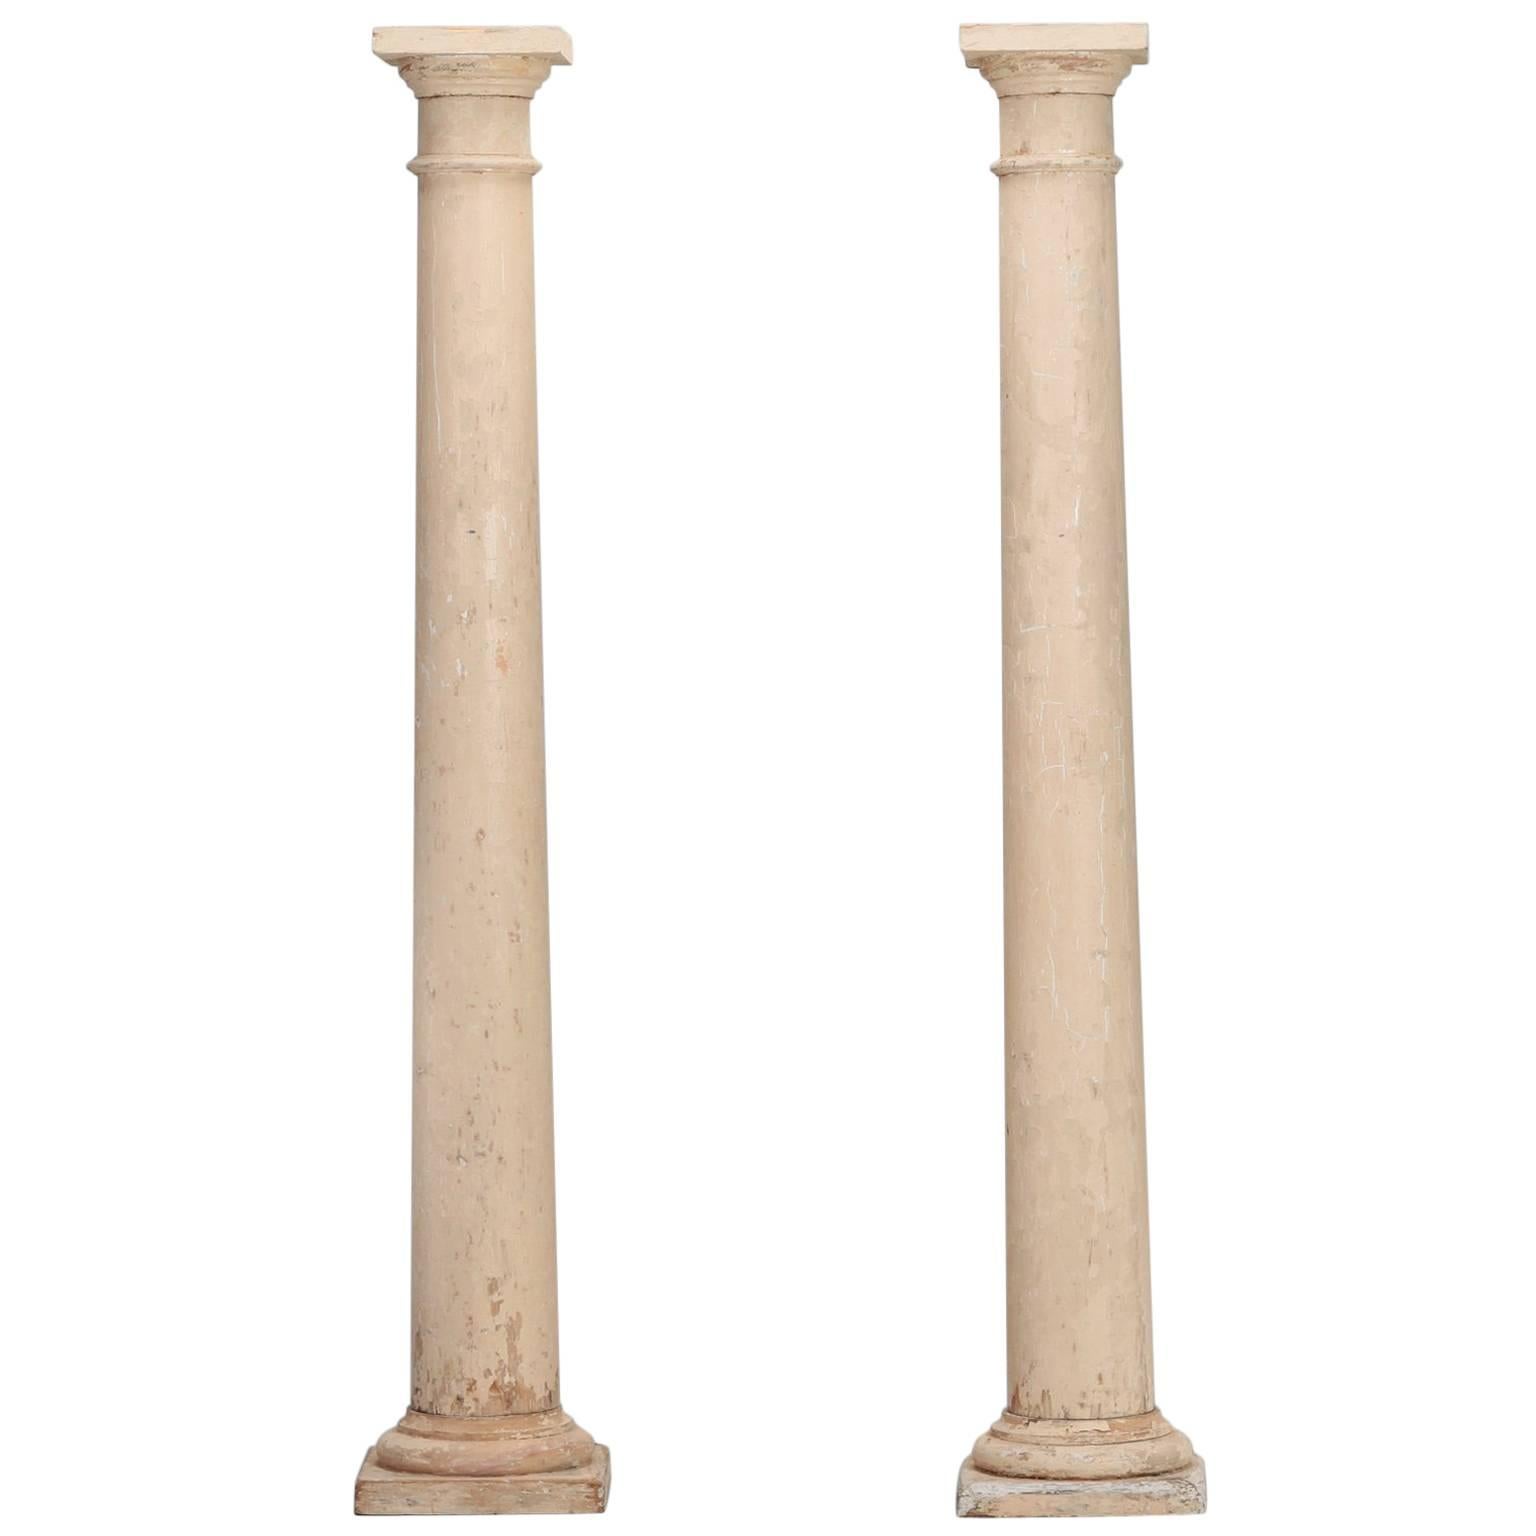 Pair of Architectural Salvage Antique White Painted Wood Columns